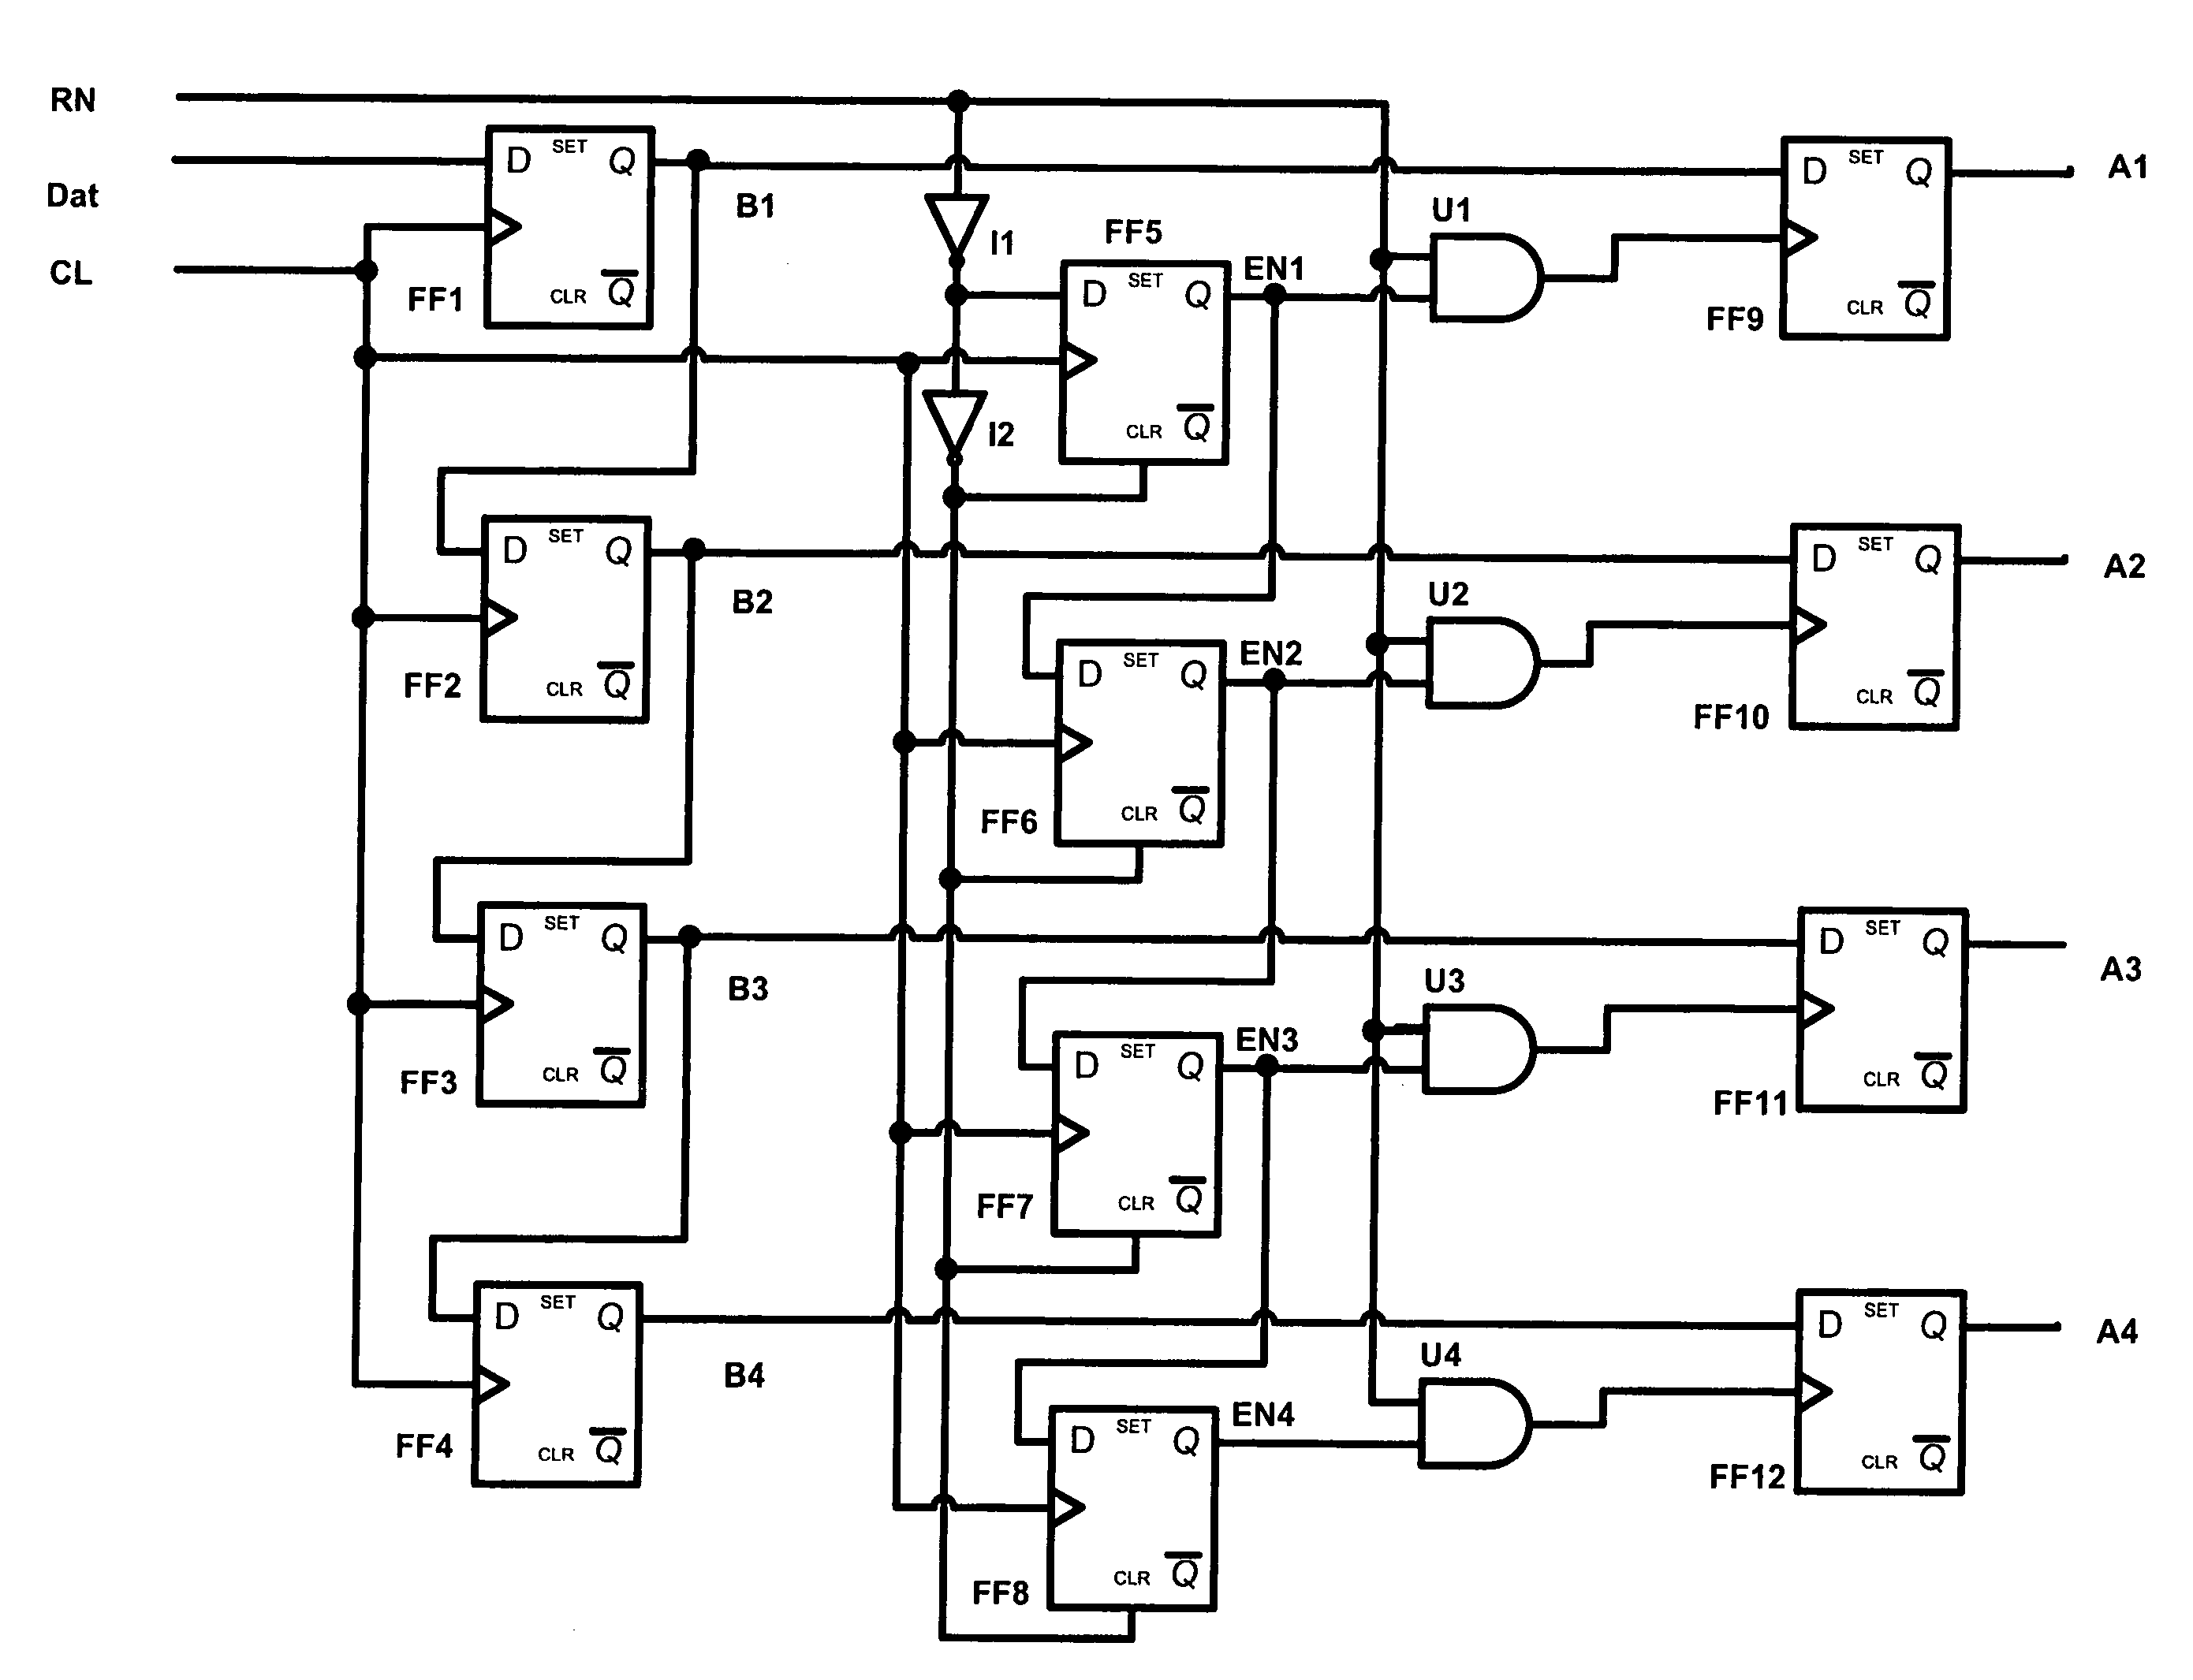 Serial data transfer in a numerically controlled control system to update an output value of the control system